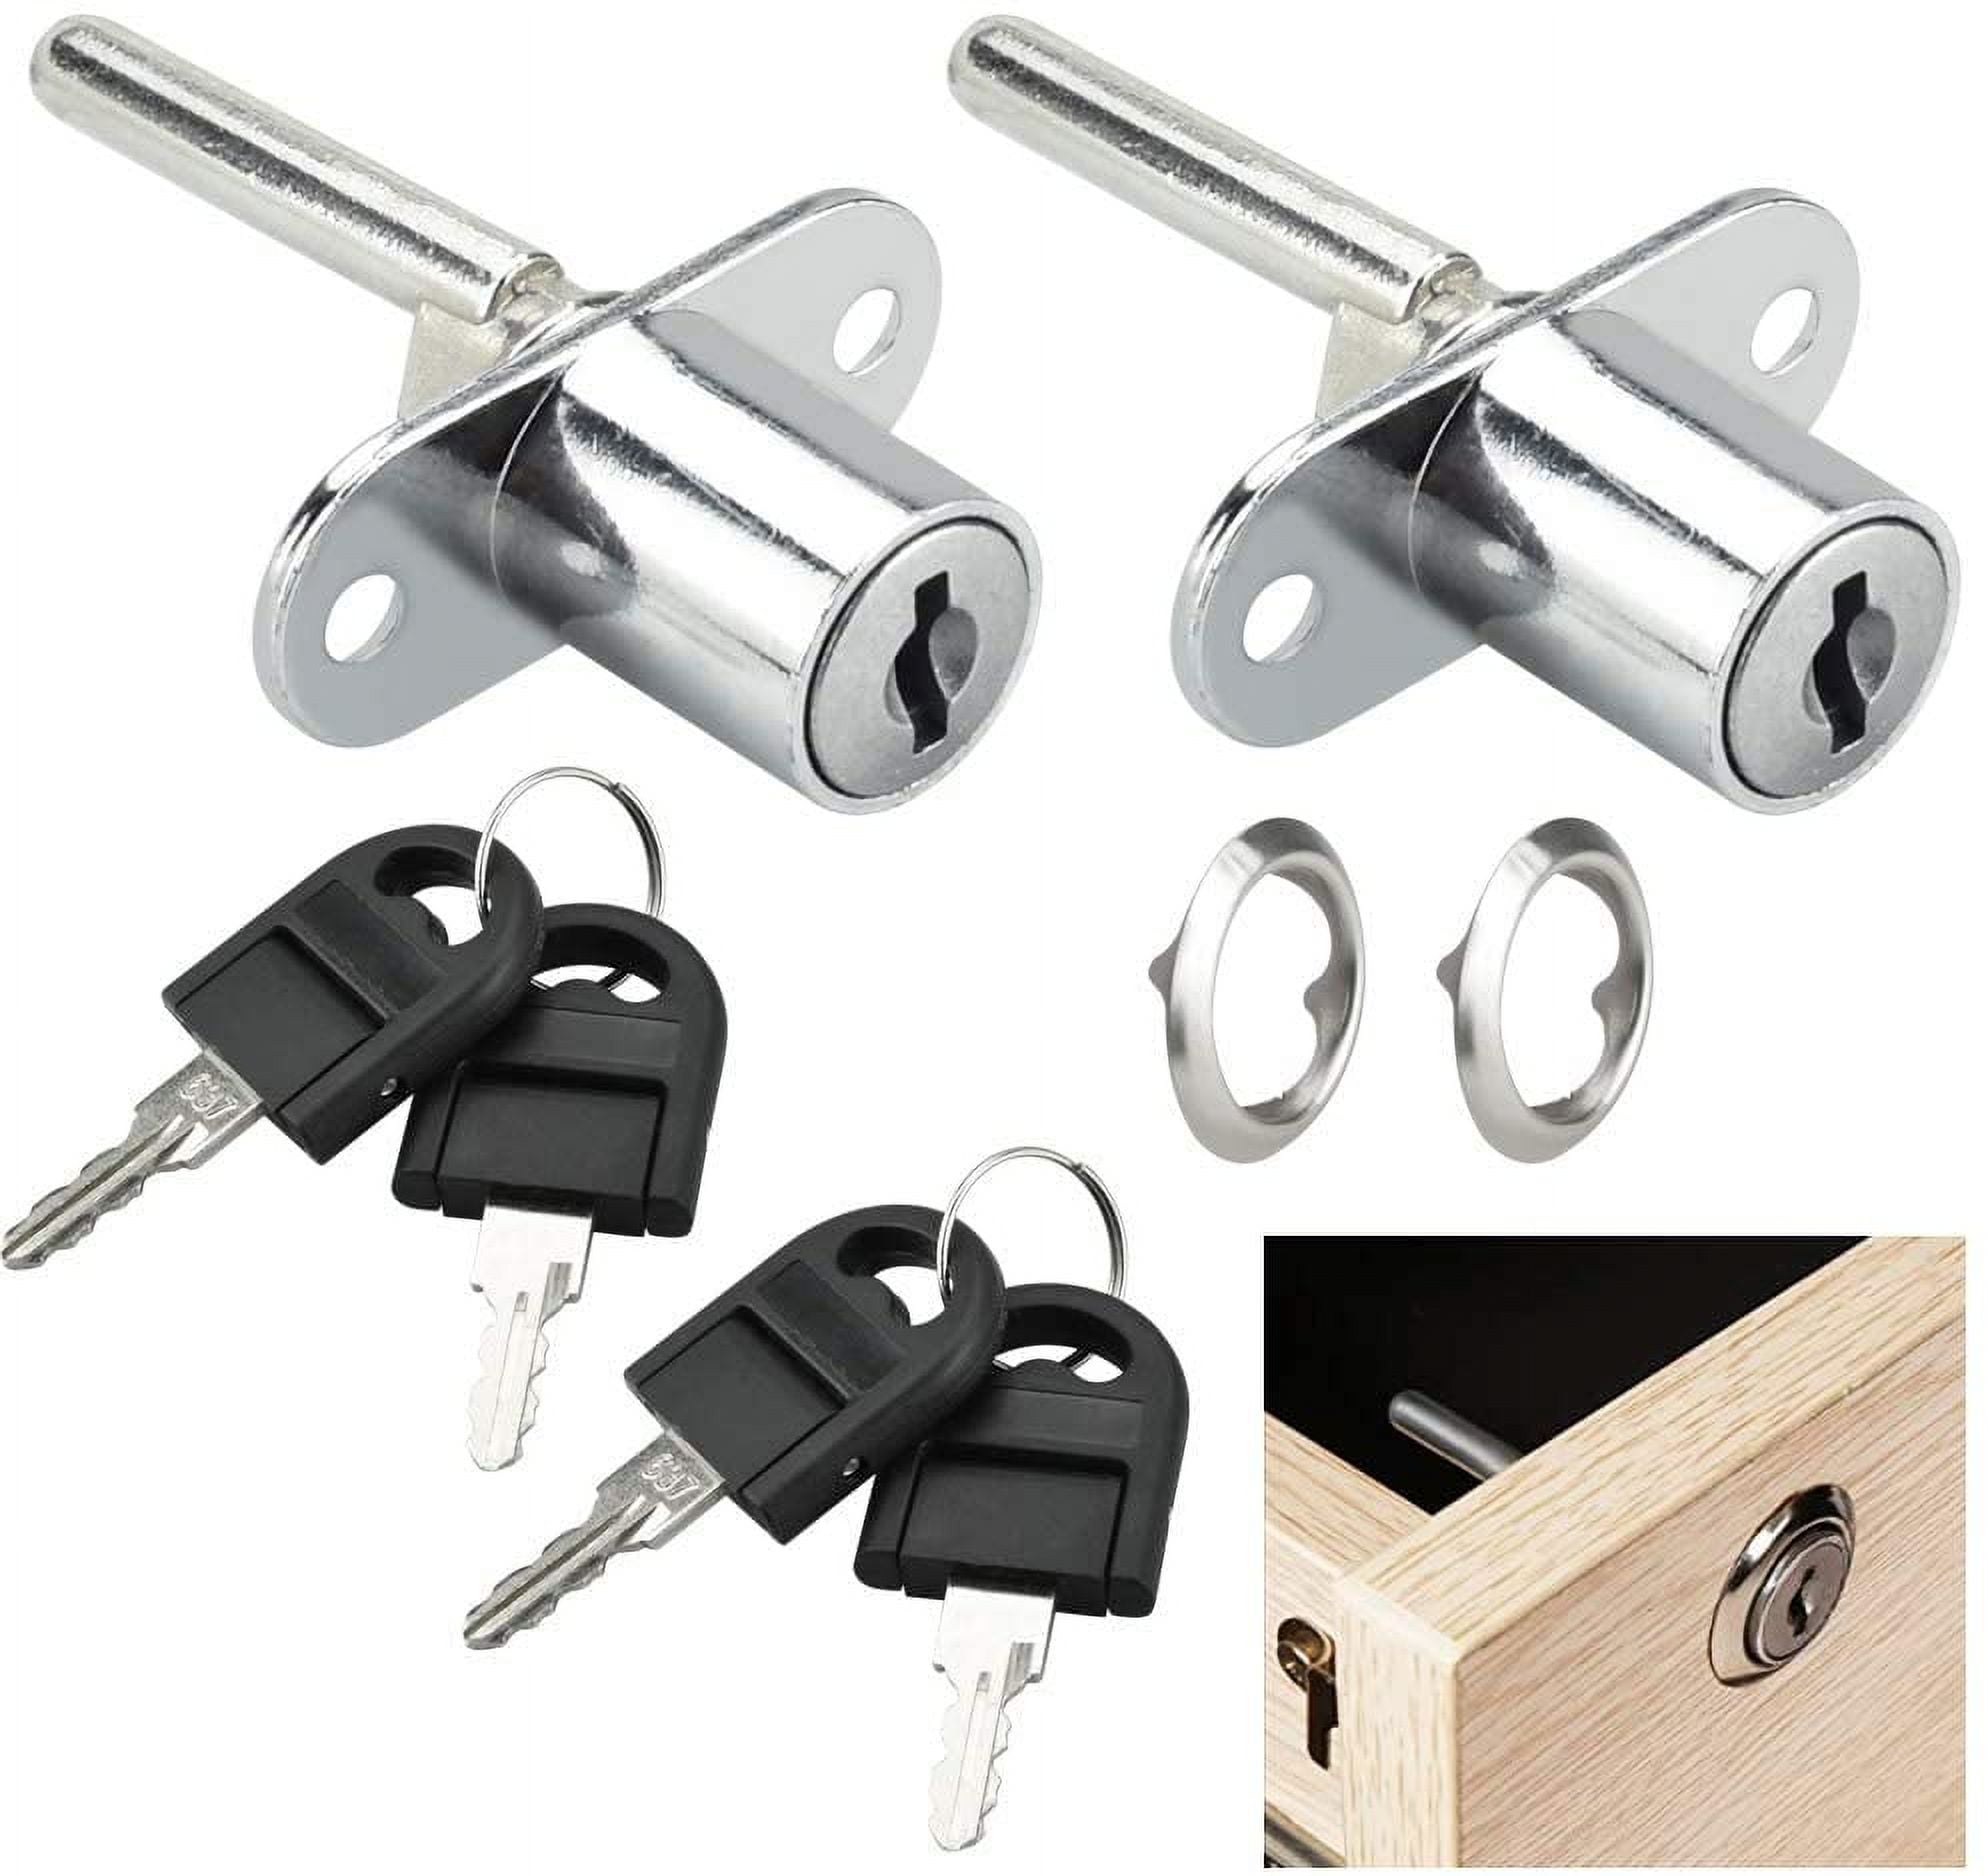 2Pcs Cabinet Lock Zinc Alloy Furniture Drawer Wardrobe File Lock with Keys  for Home Office Security(1#) 